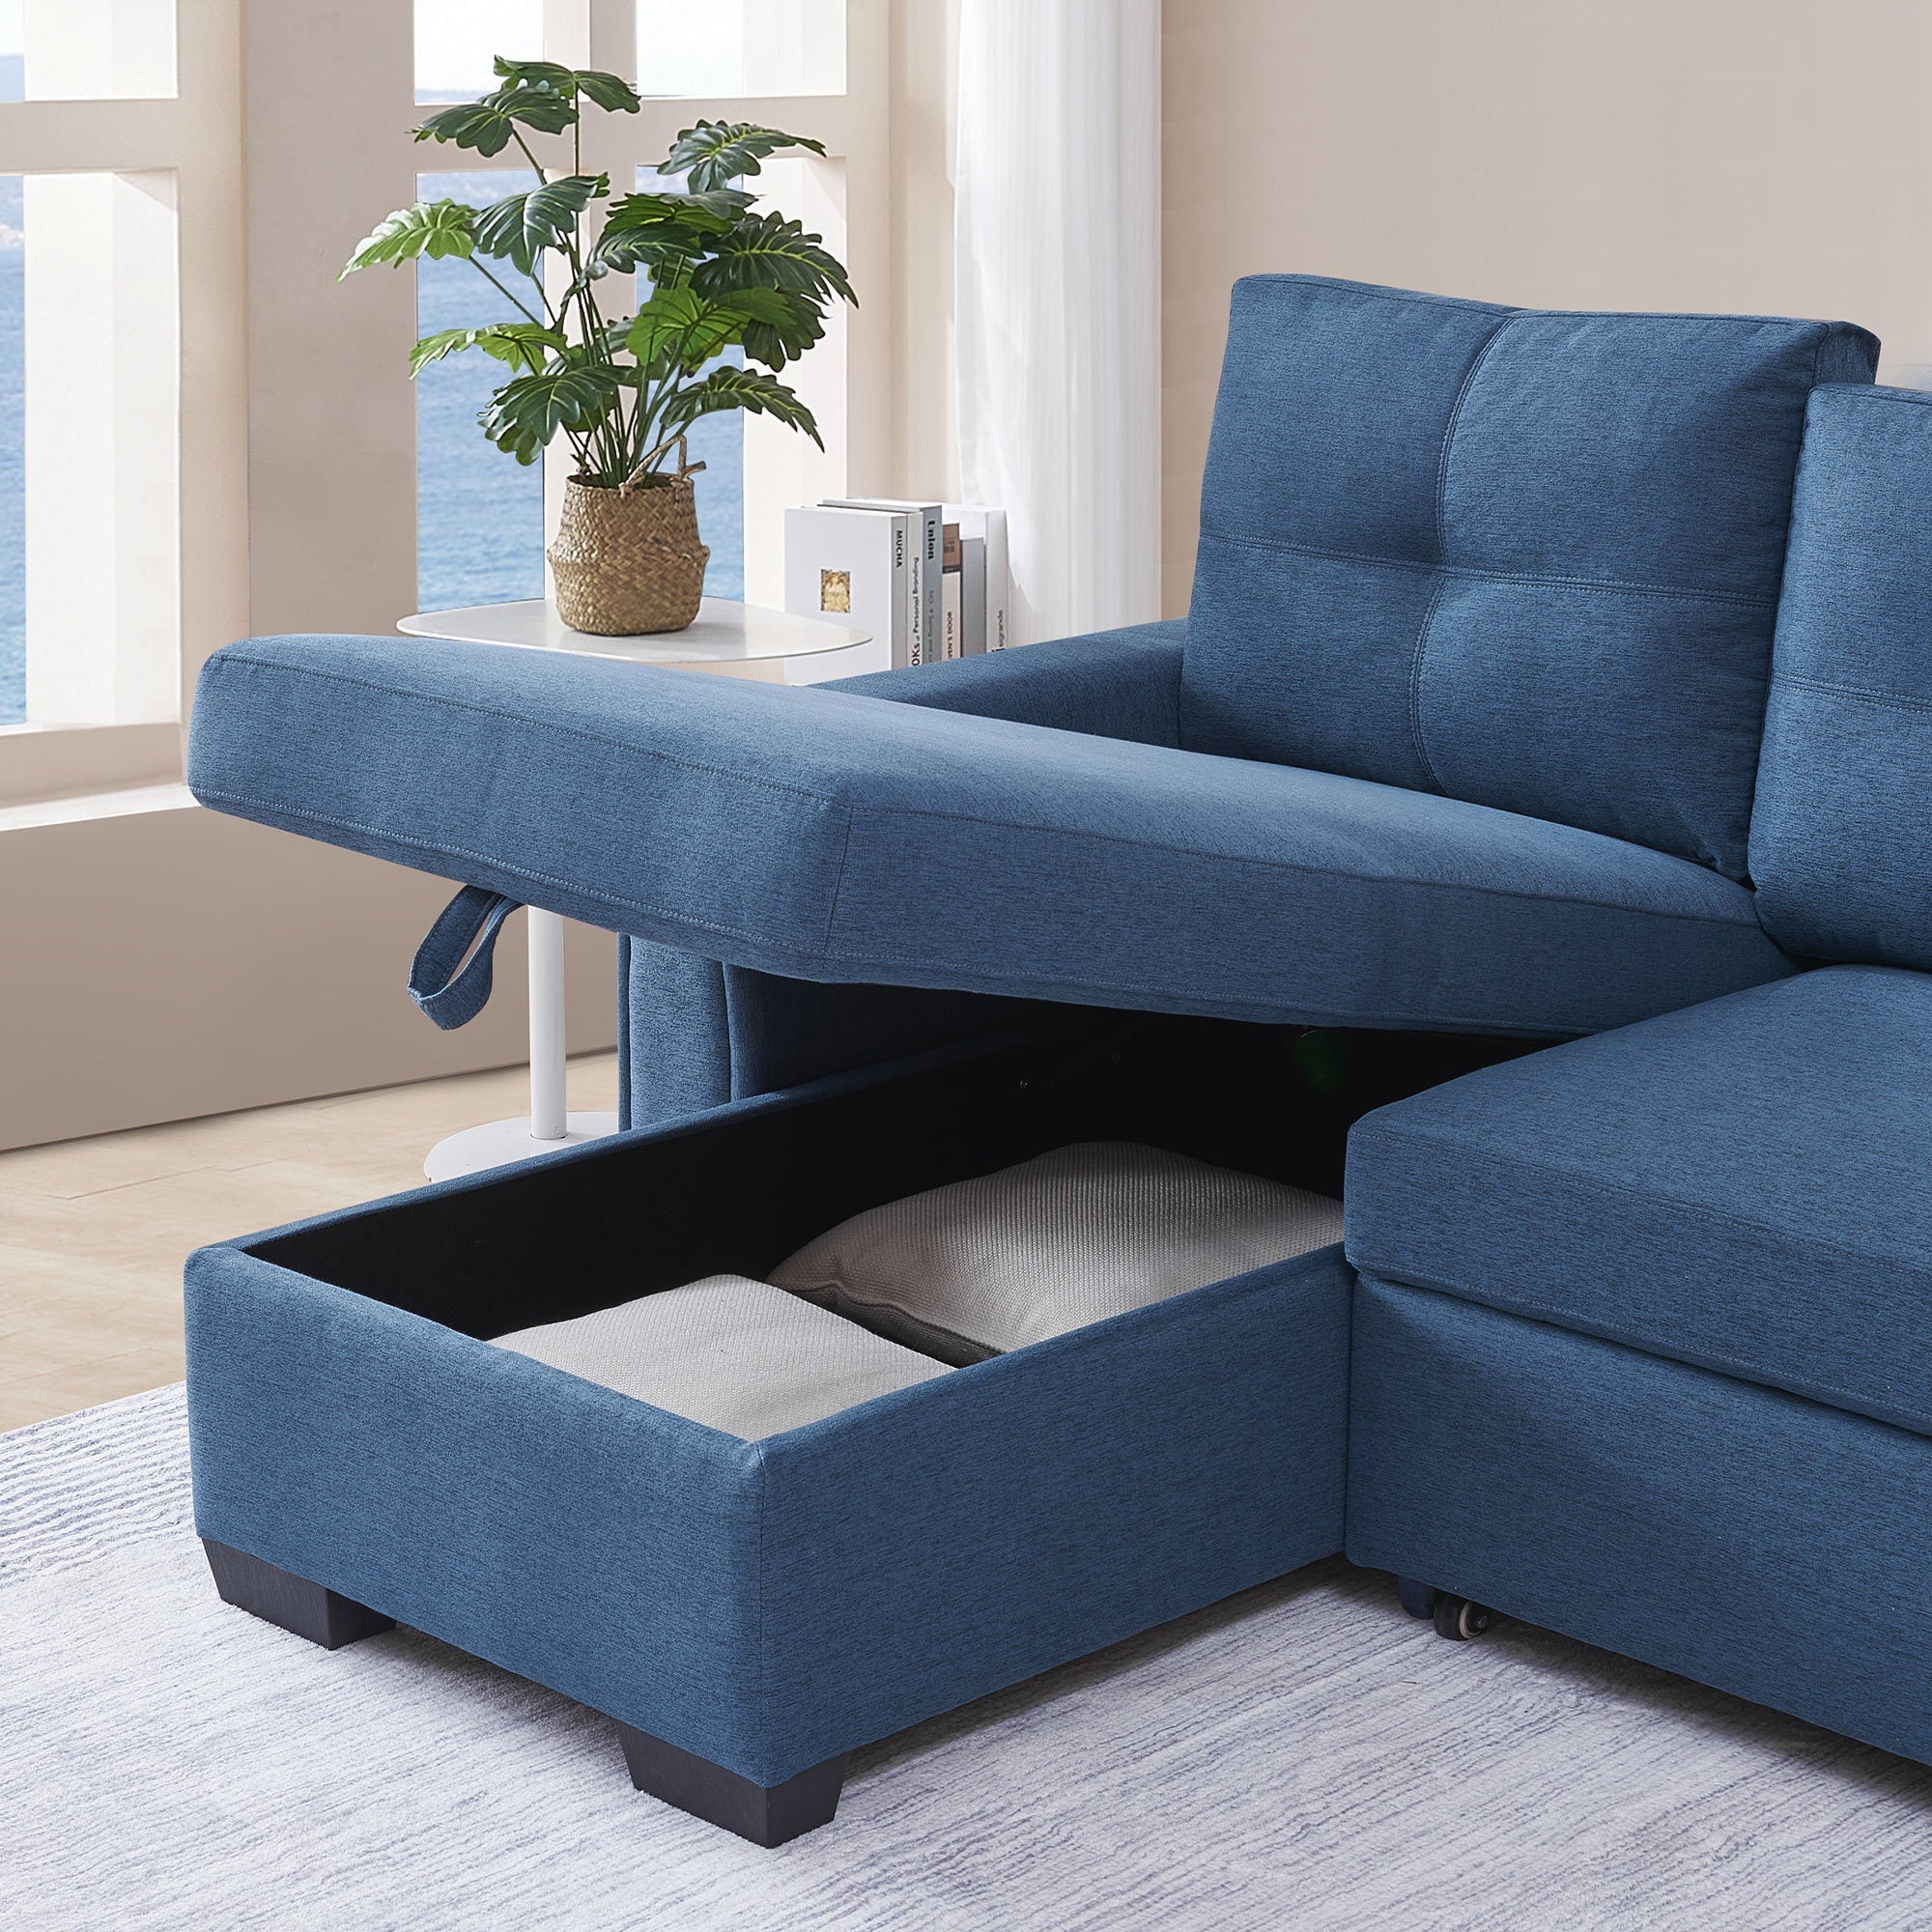 91.7" L-Shape Sleeper Sectional Sofa w/Storage Chaise - Blue Fabric-Sleeper Sectionals-American Furniture Outlet